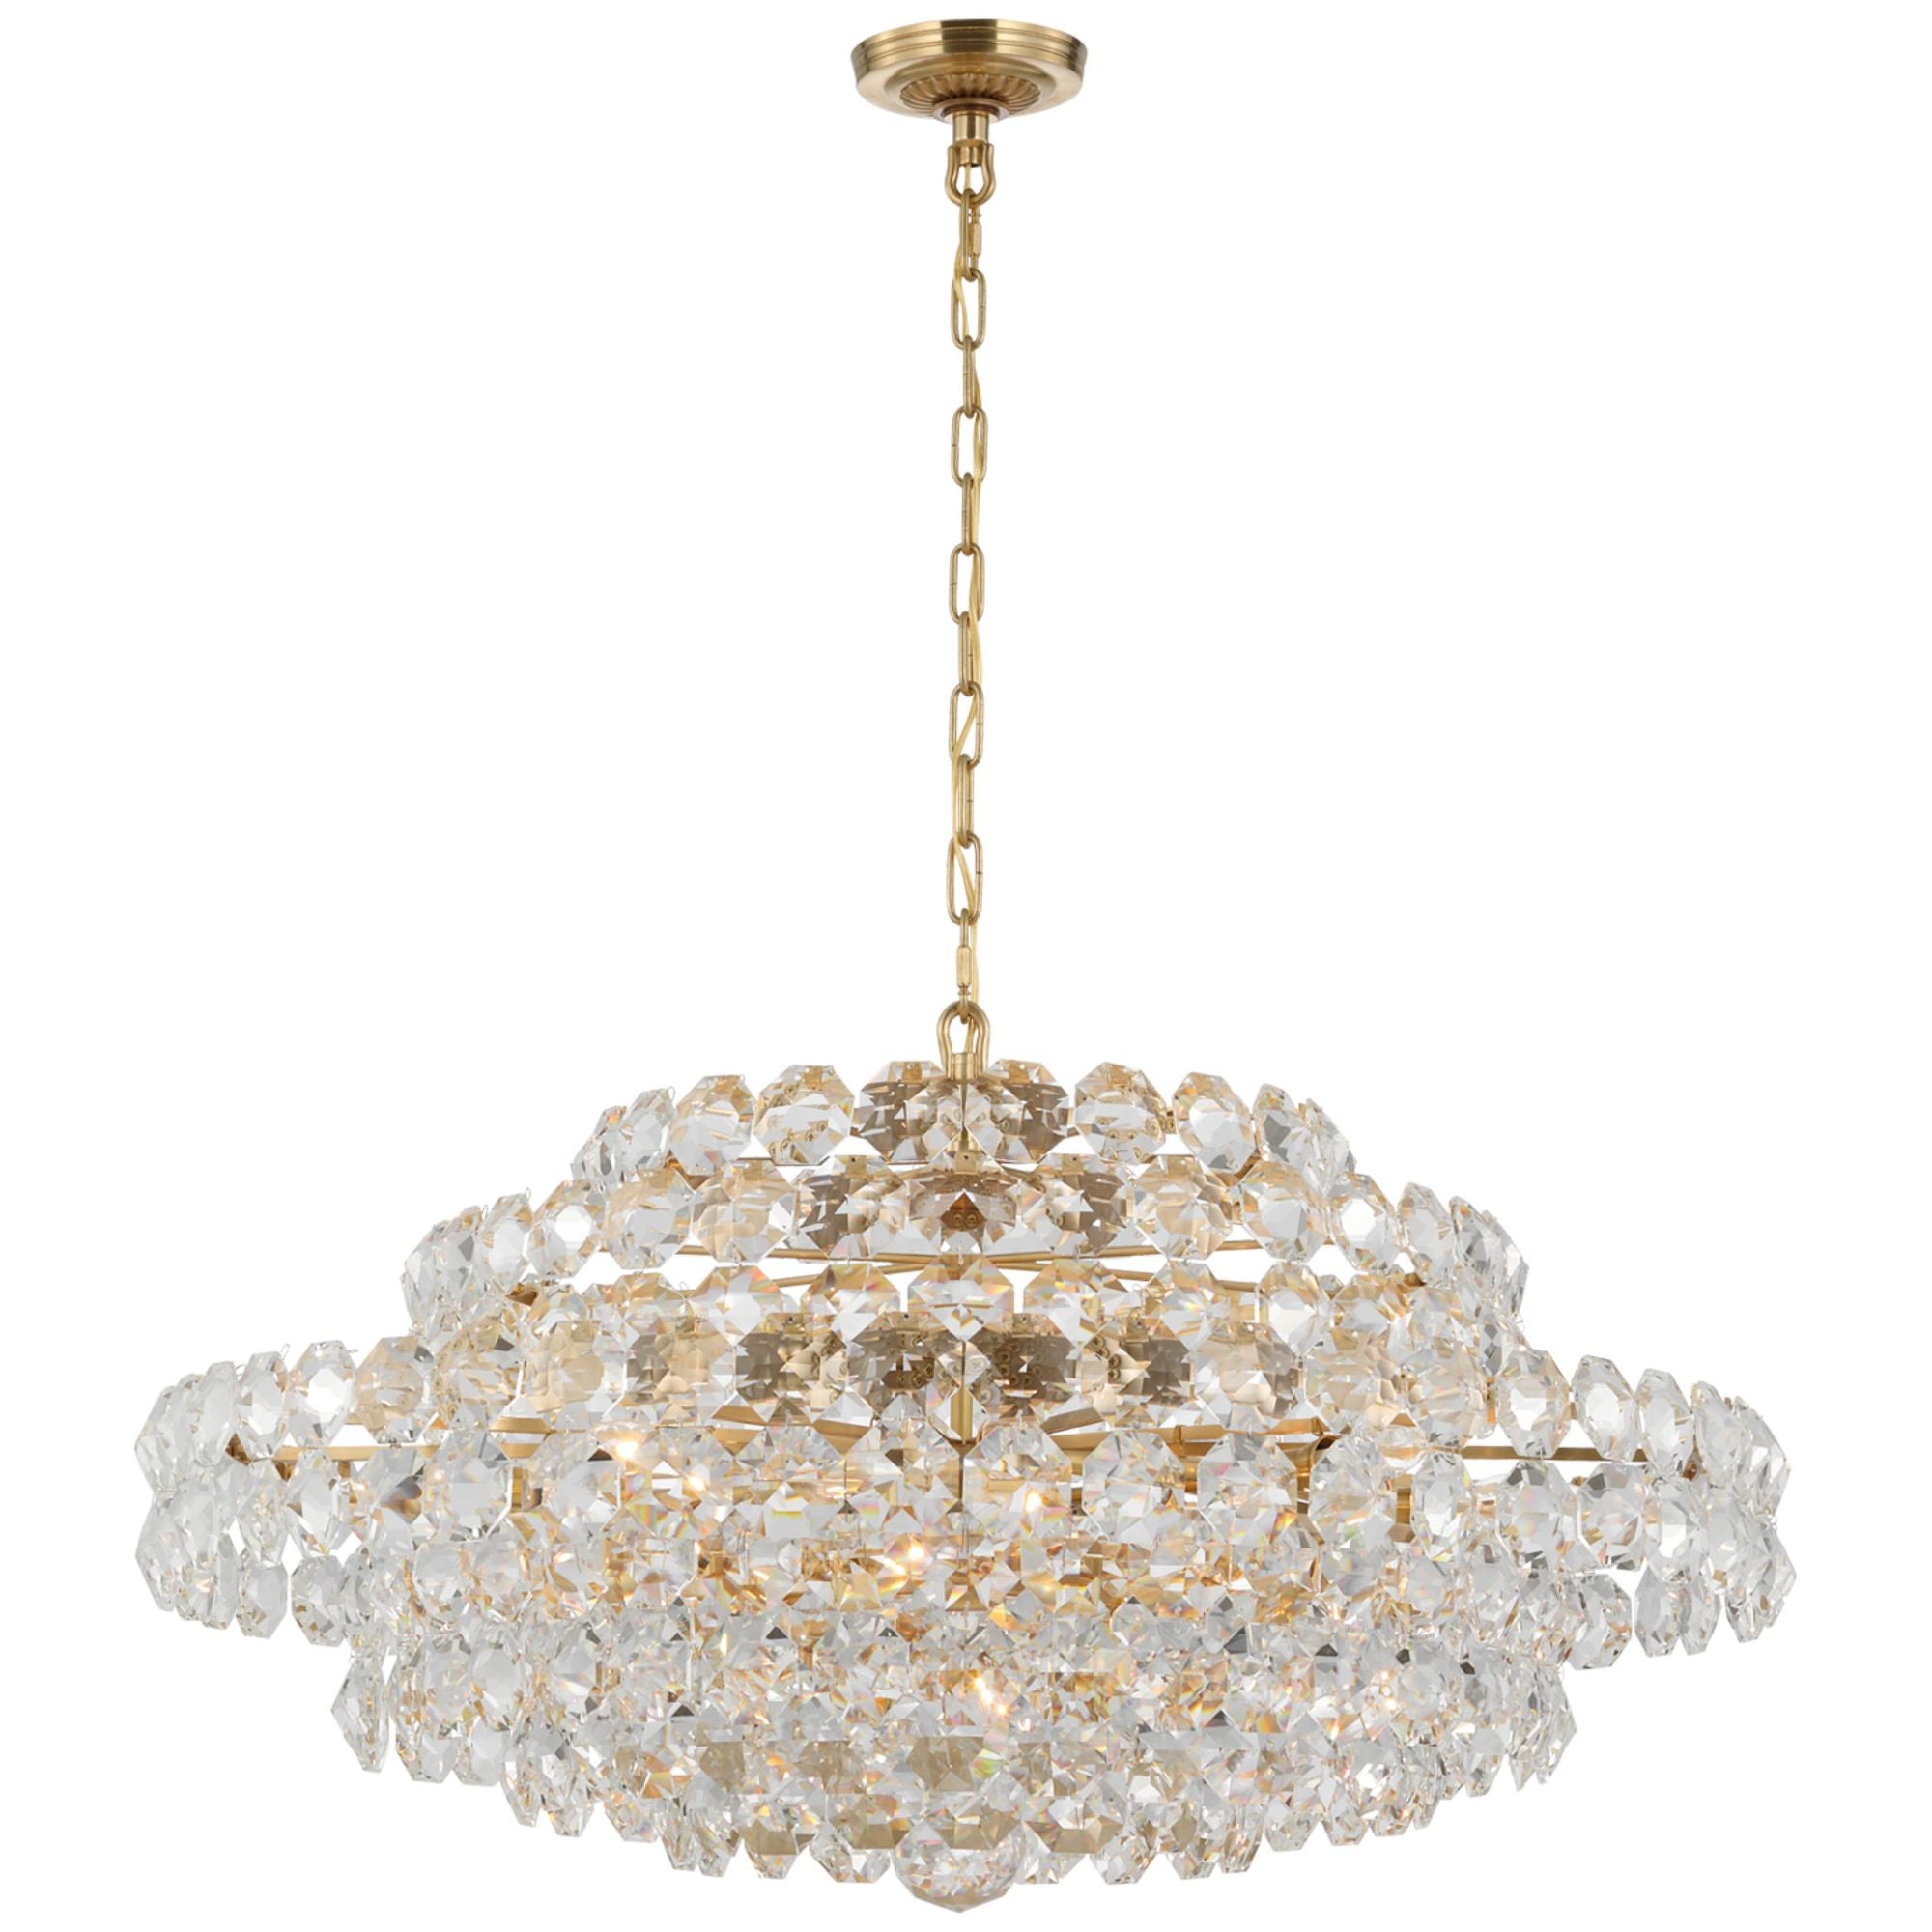 AERIN Sanger Large Chandelier in Hand-Rubbed Antique Brass with Crystal